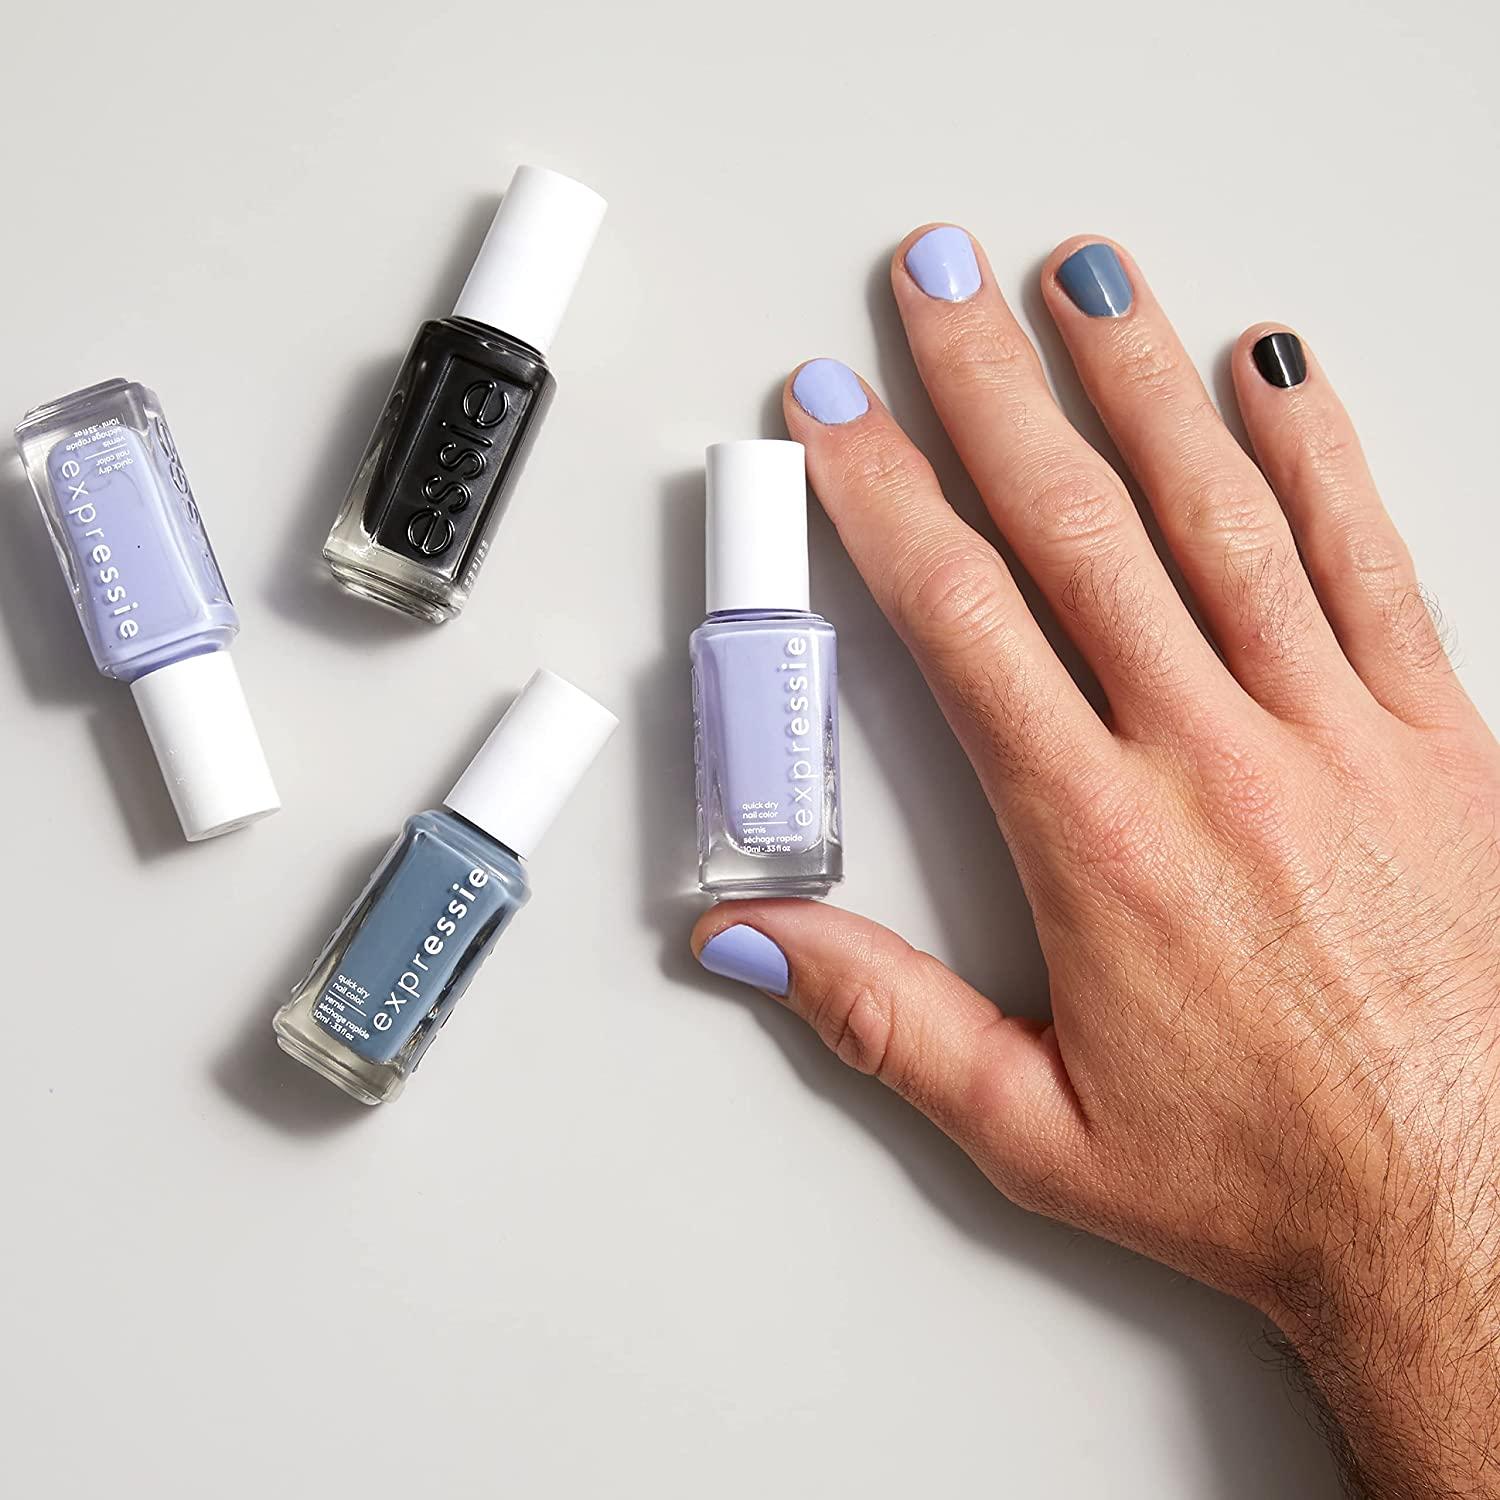 blue expressie Lilac, essie 0.33 Oz with Fl Destiny, with 0.33 destiny with Ounce sk8 8-Free Destiny, (lilac Vegan, Sk8 Nail 356 Sk8 1) Quick-Dry of with Polish, undertones) (Pack